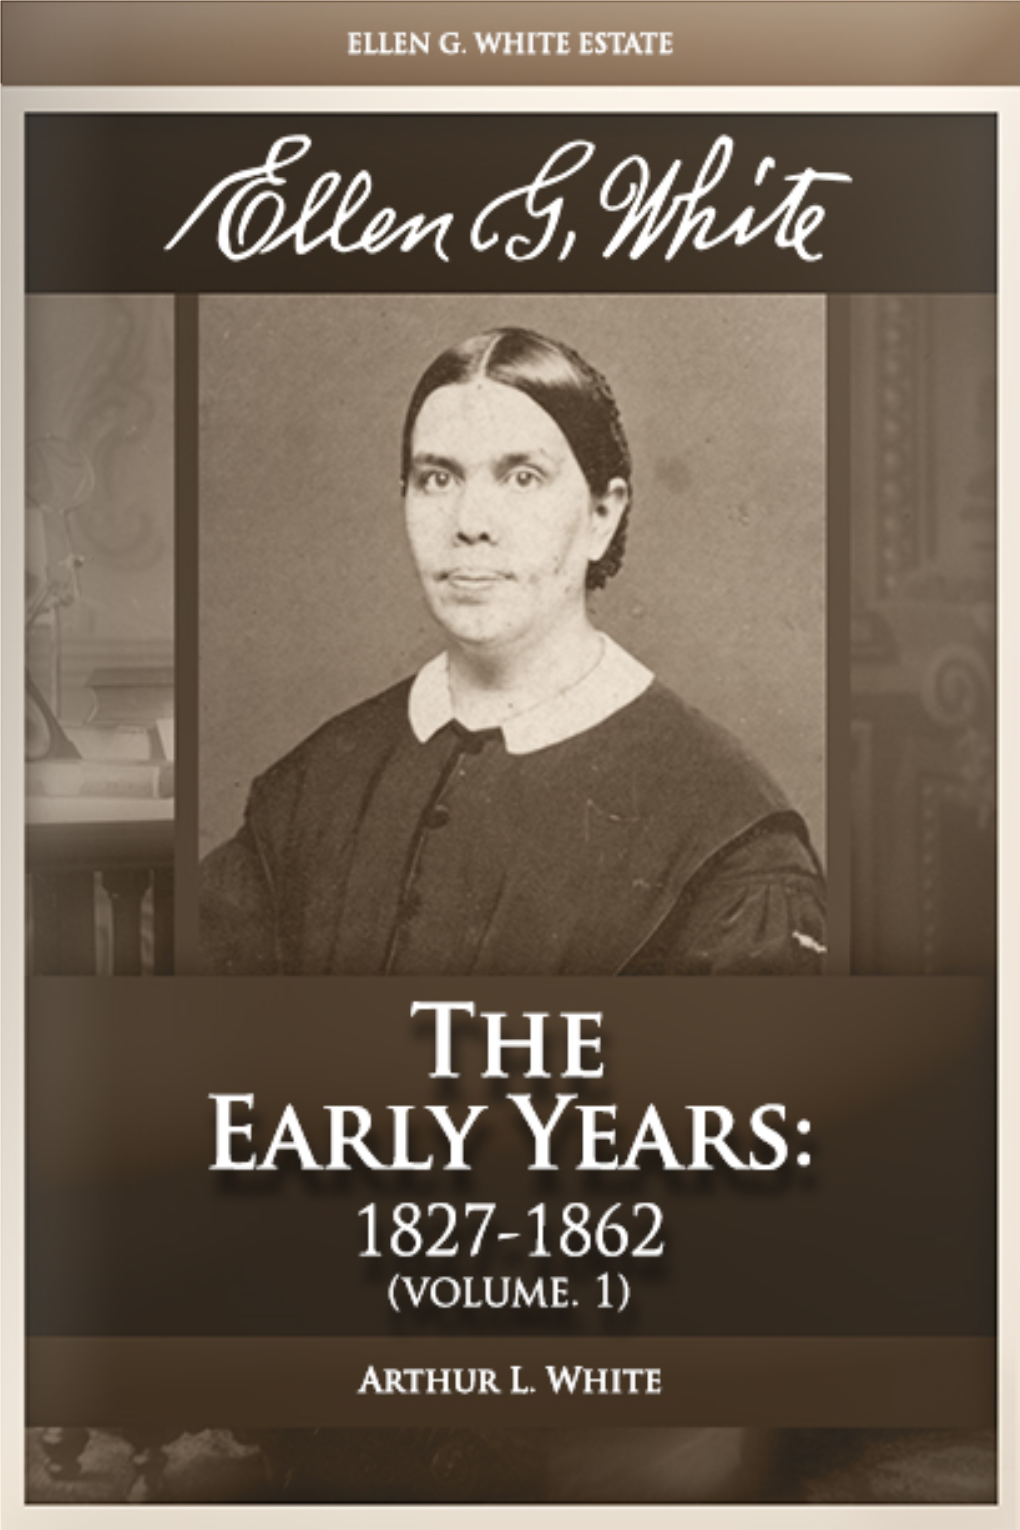 Ellen G. White: Volume 1—The Early Years: 1827-1862